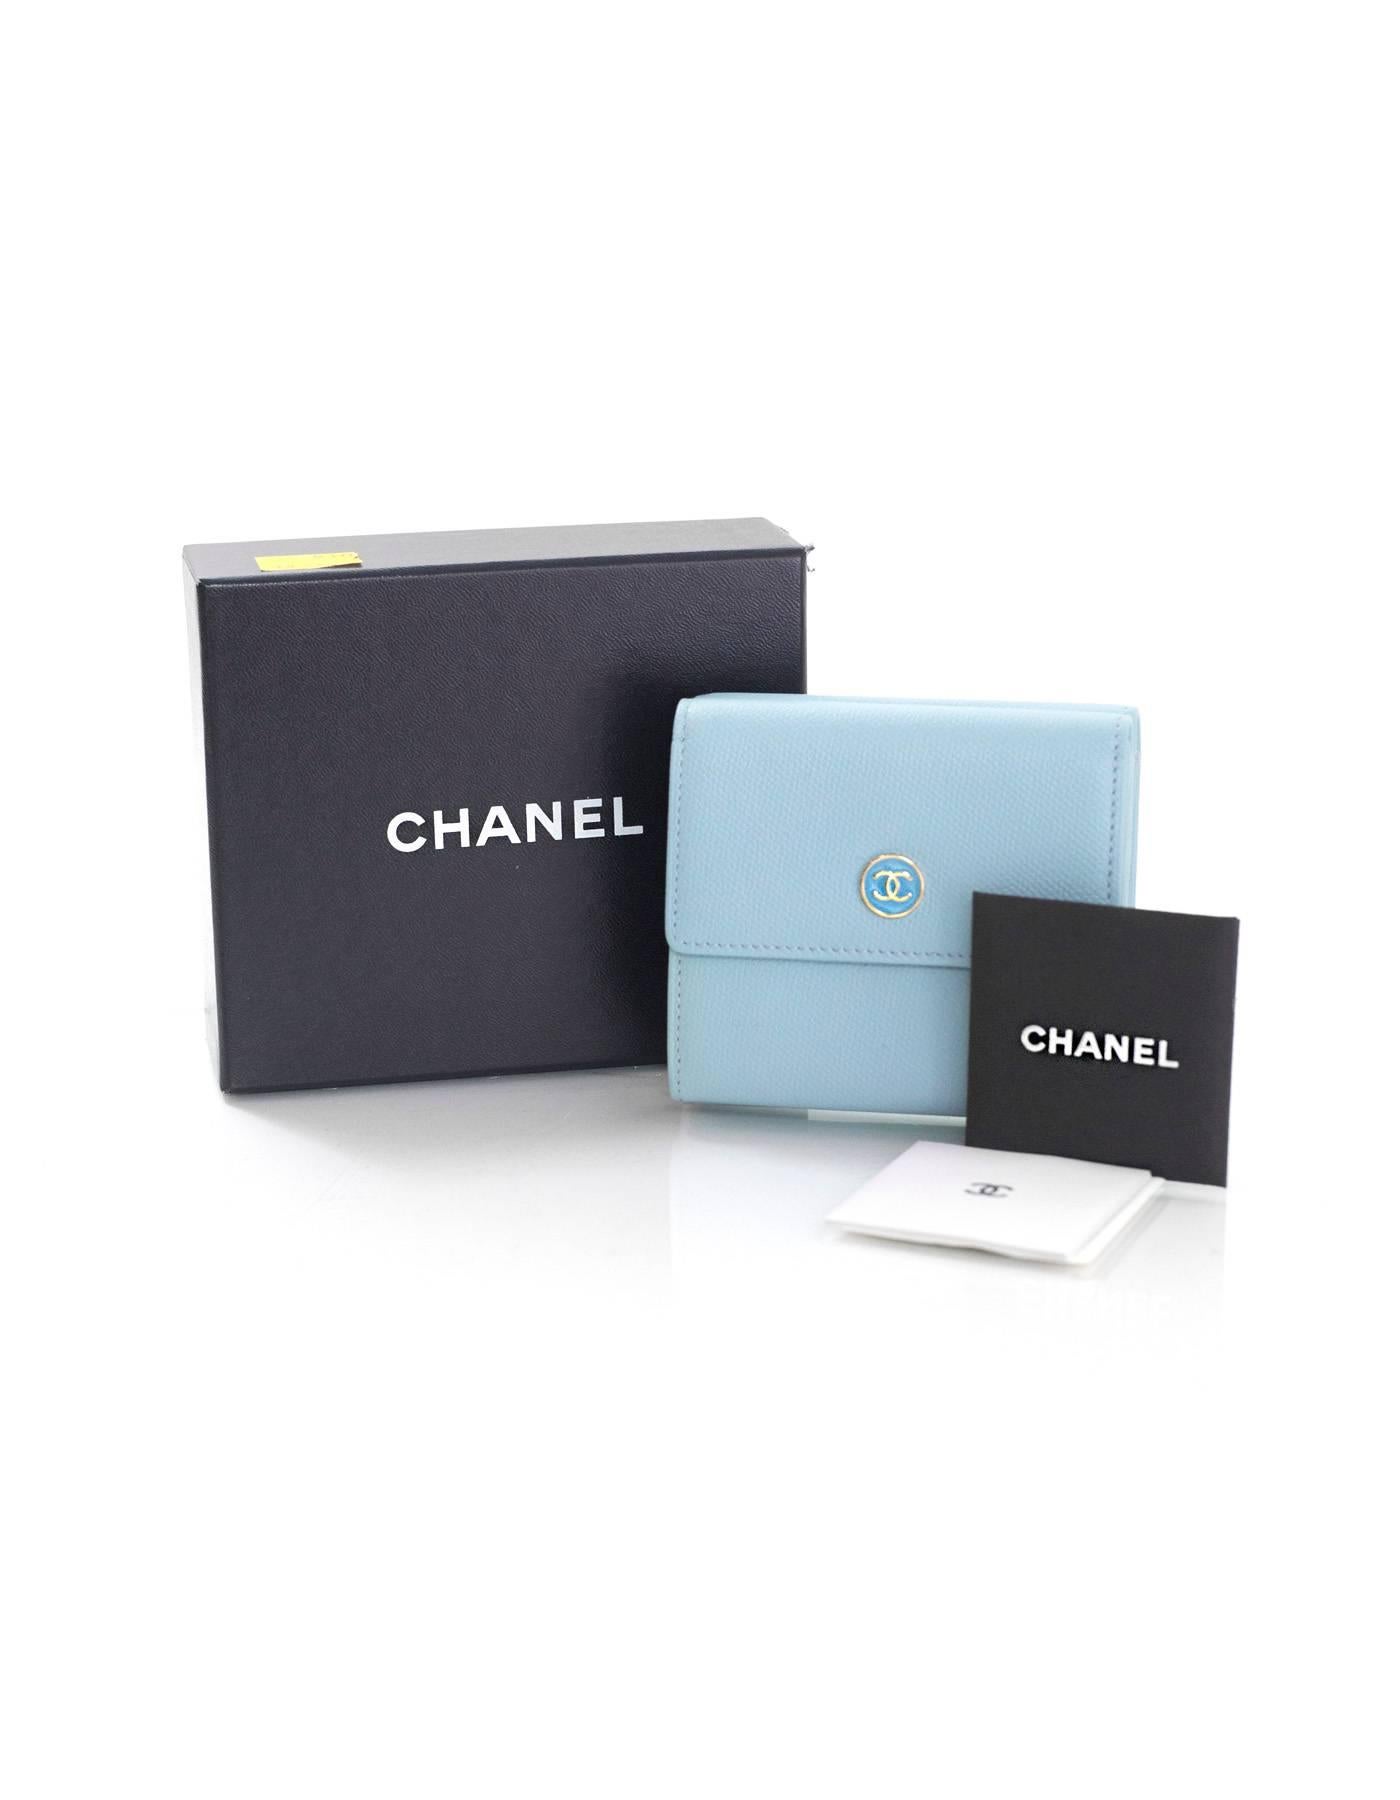 Chanel Light Blue Leather Double Snap Short Wallet 3